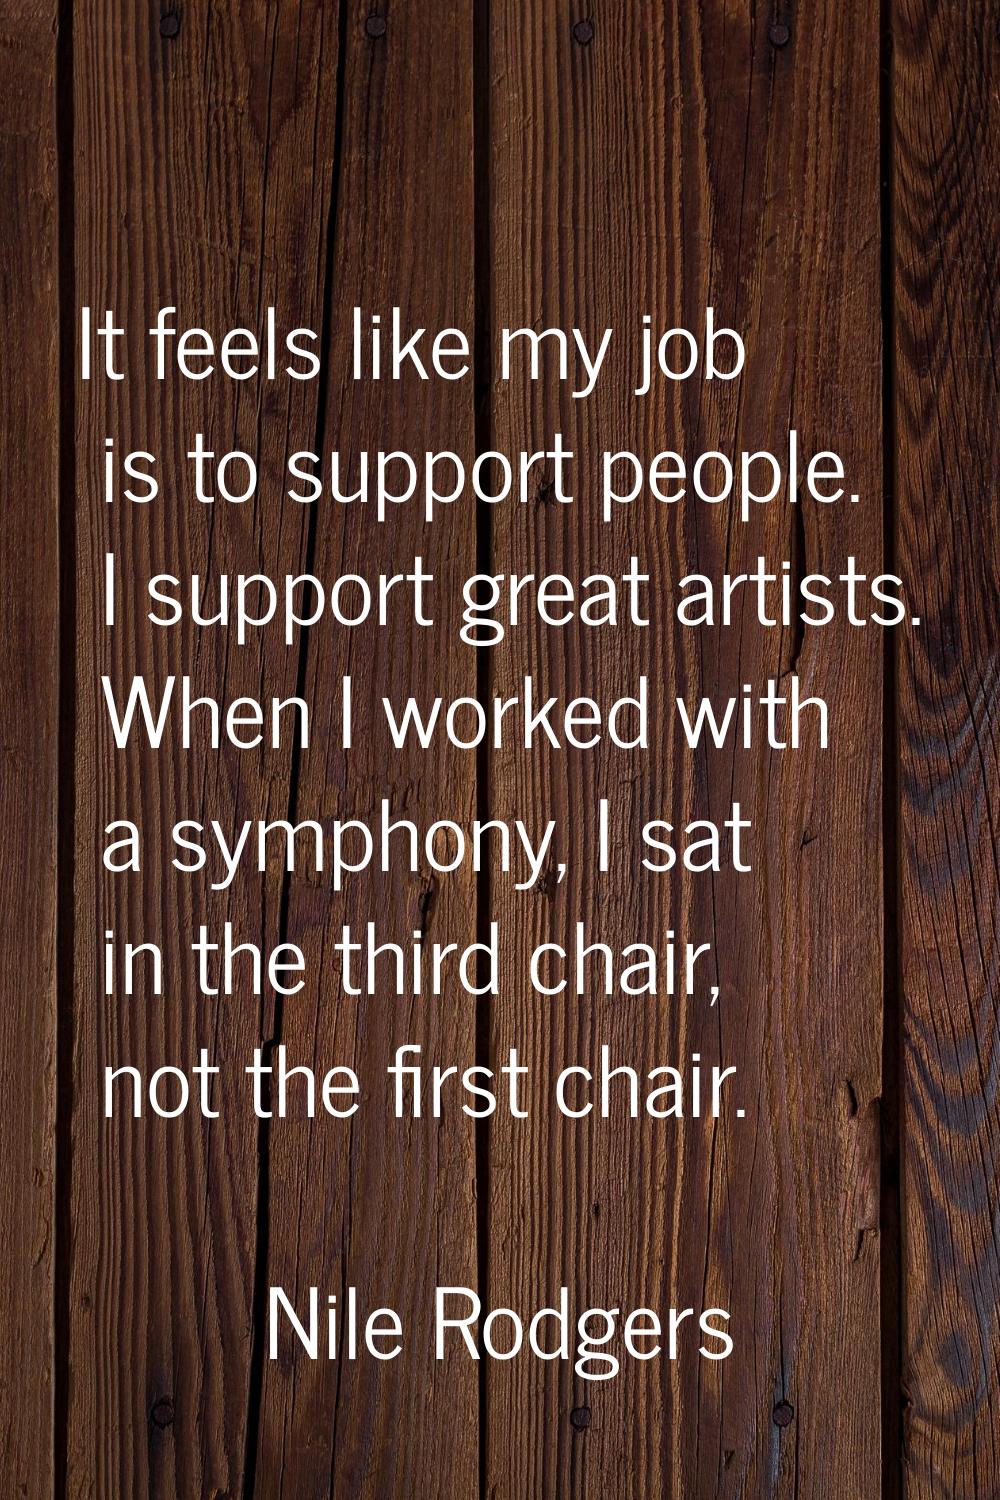 It feels like my job is to support people. I support great artists. When I worked with a symphony, 